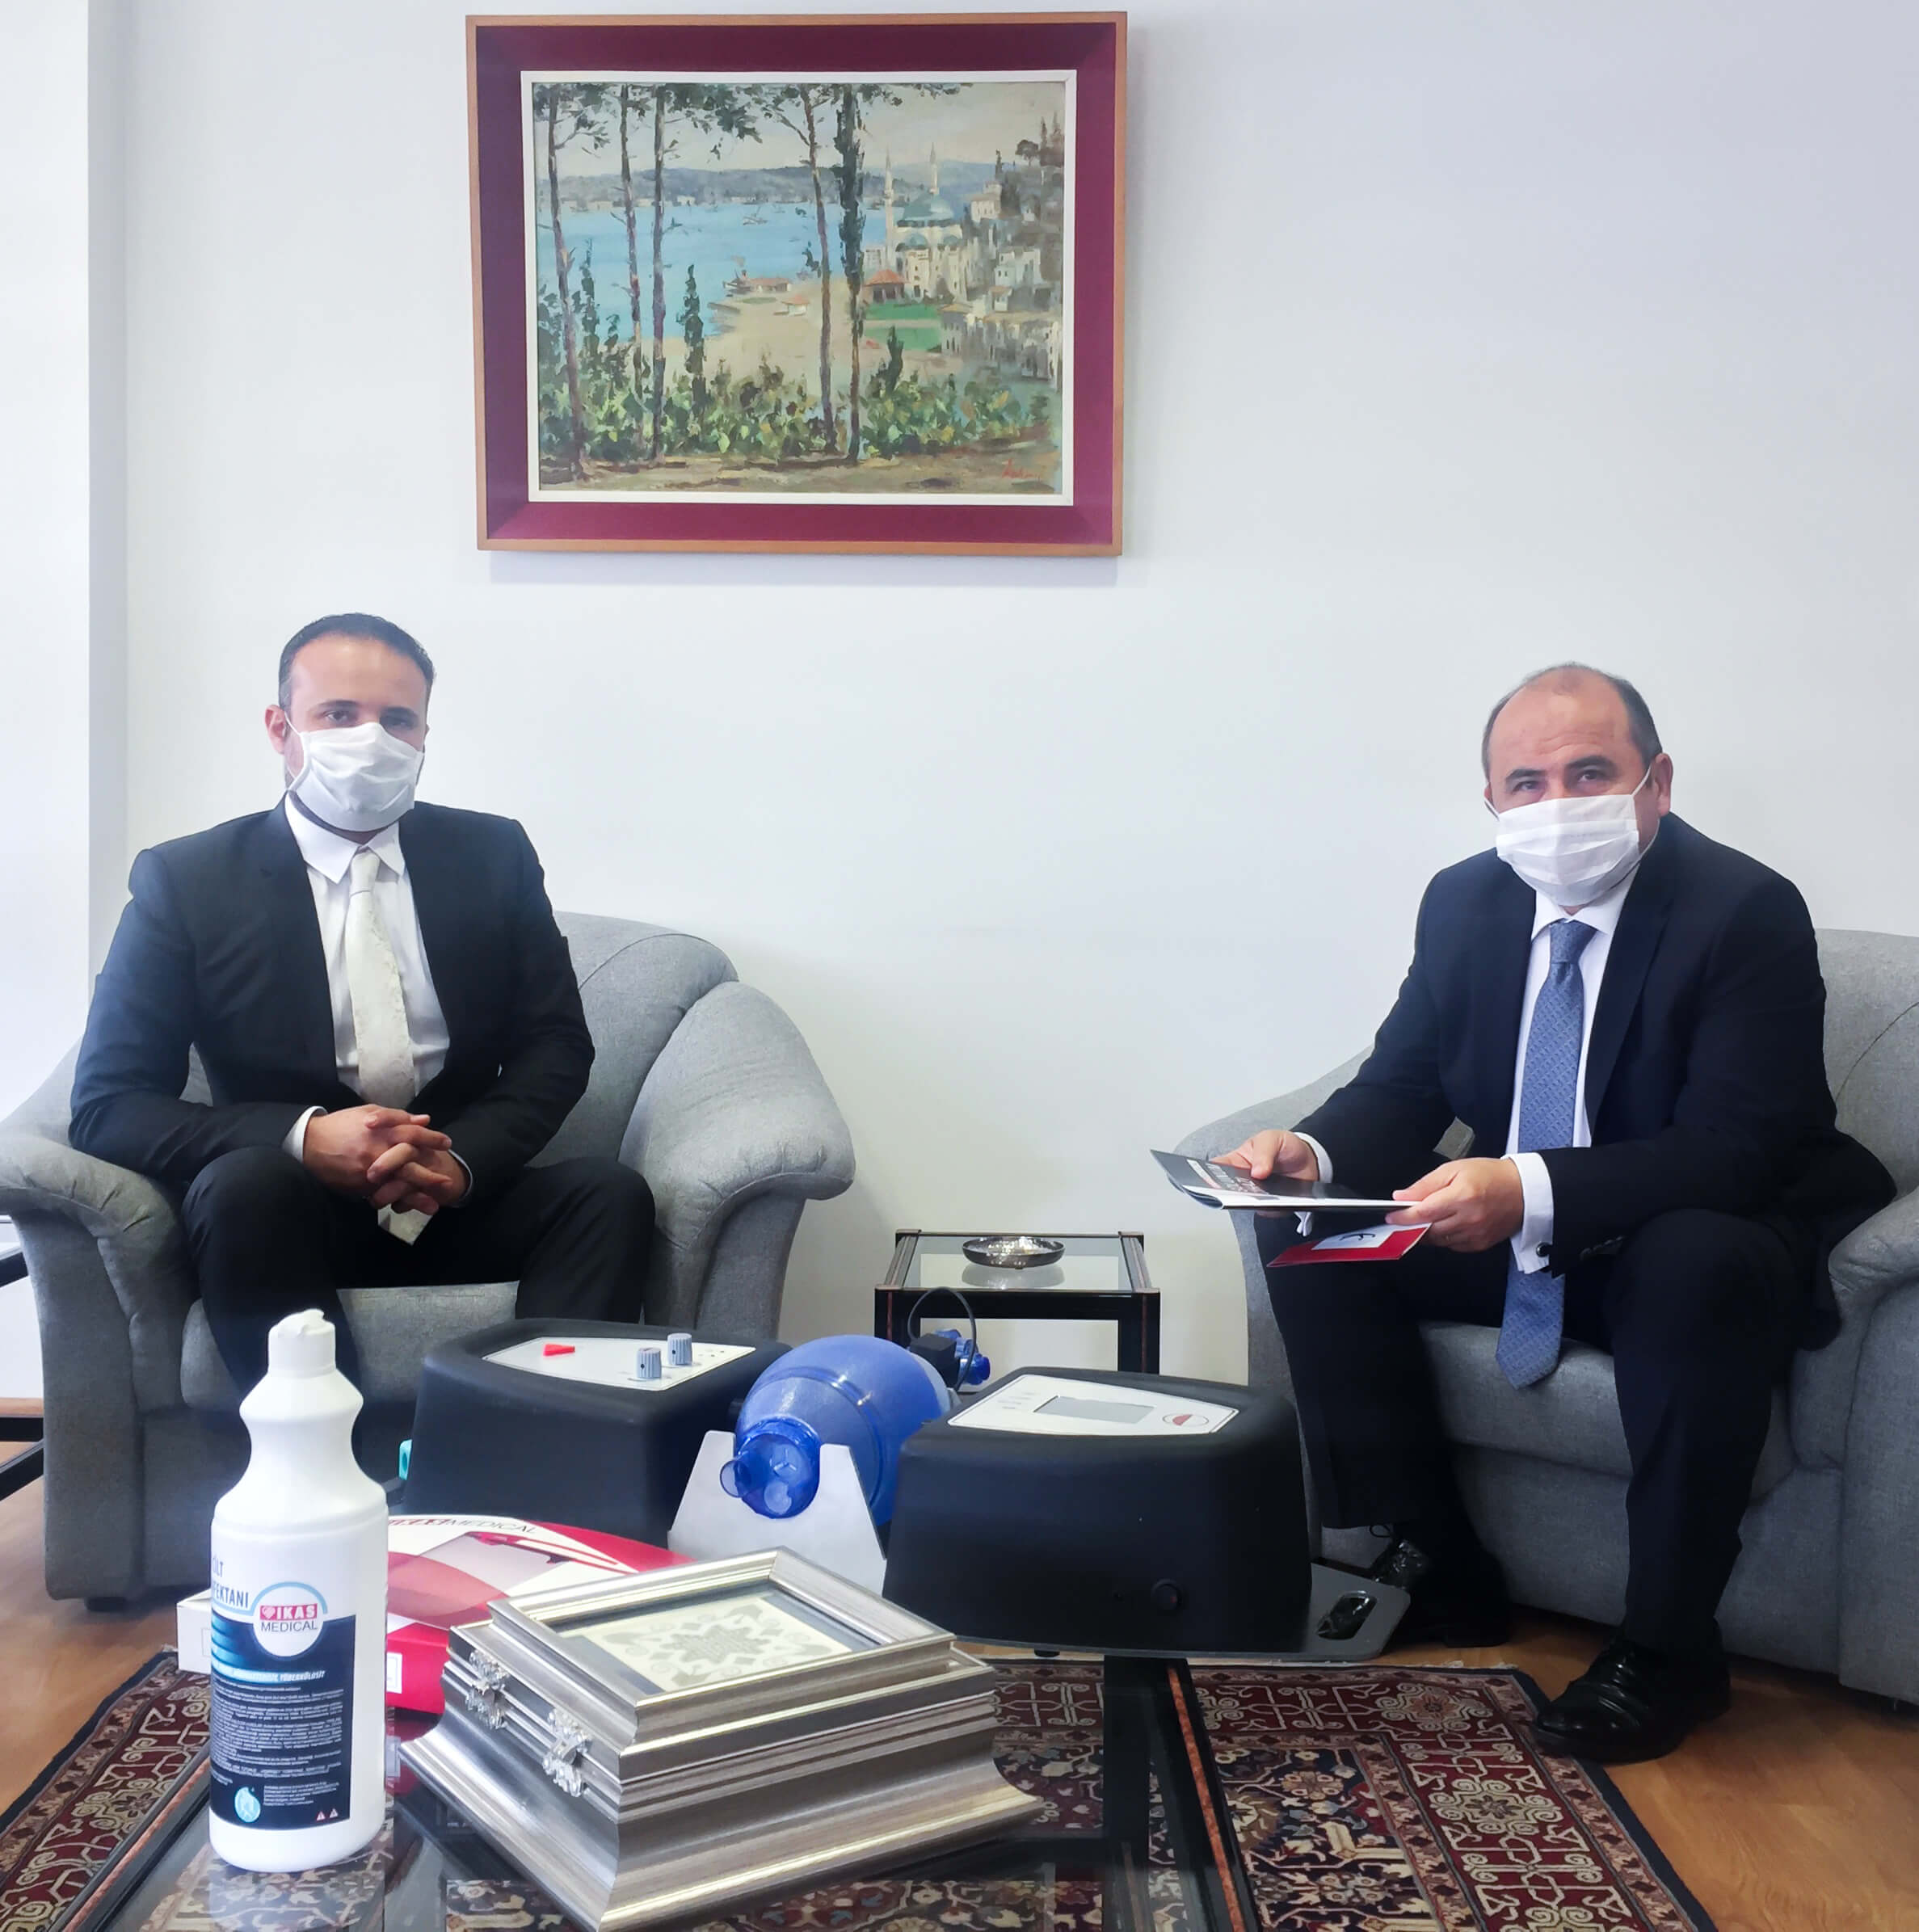 Alternative Respirator produced by Near East University delivered to Ambassador Ali Murat Başçeri to be delivered to the Ministry of Health of Turkey